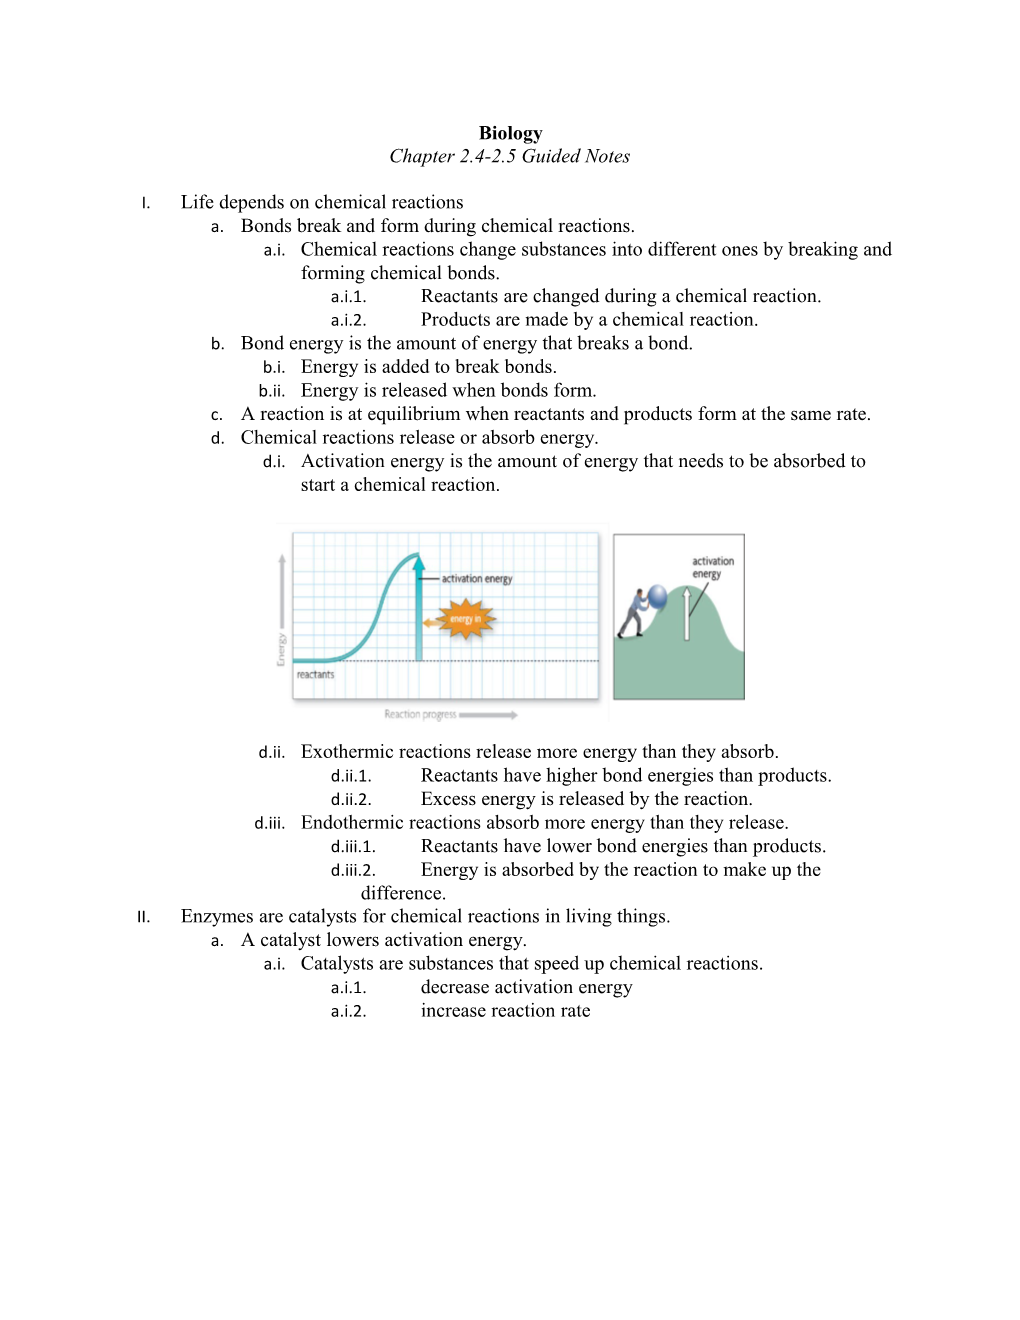 Chapter 2.4-2.5 Guided Notes